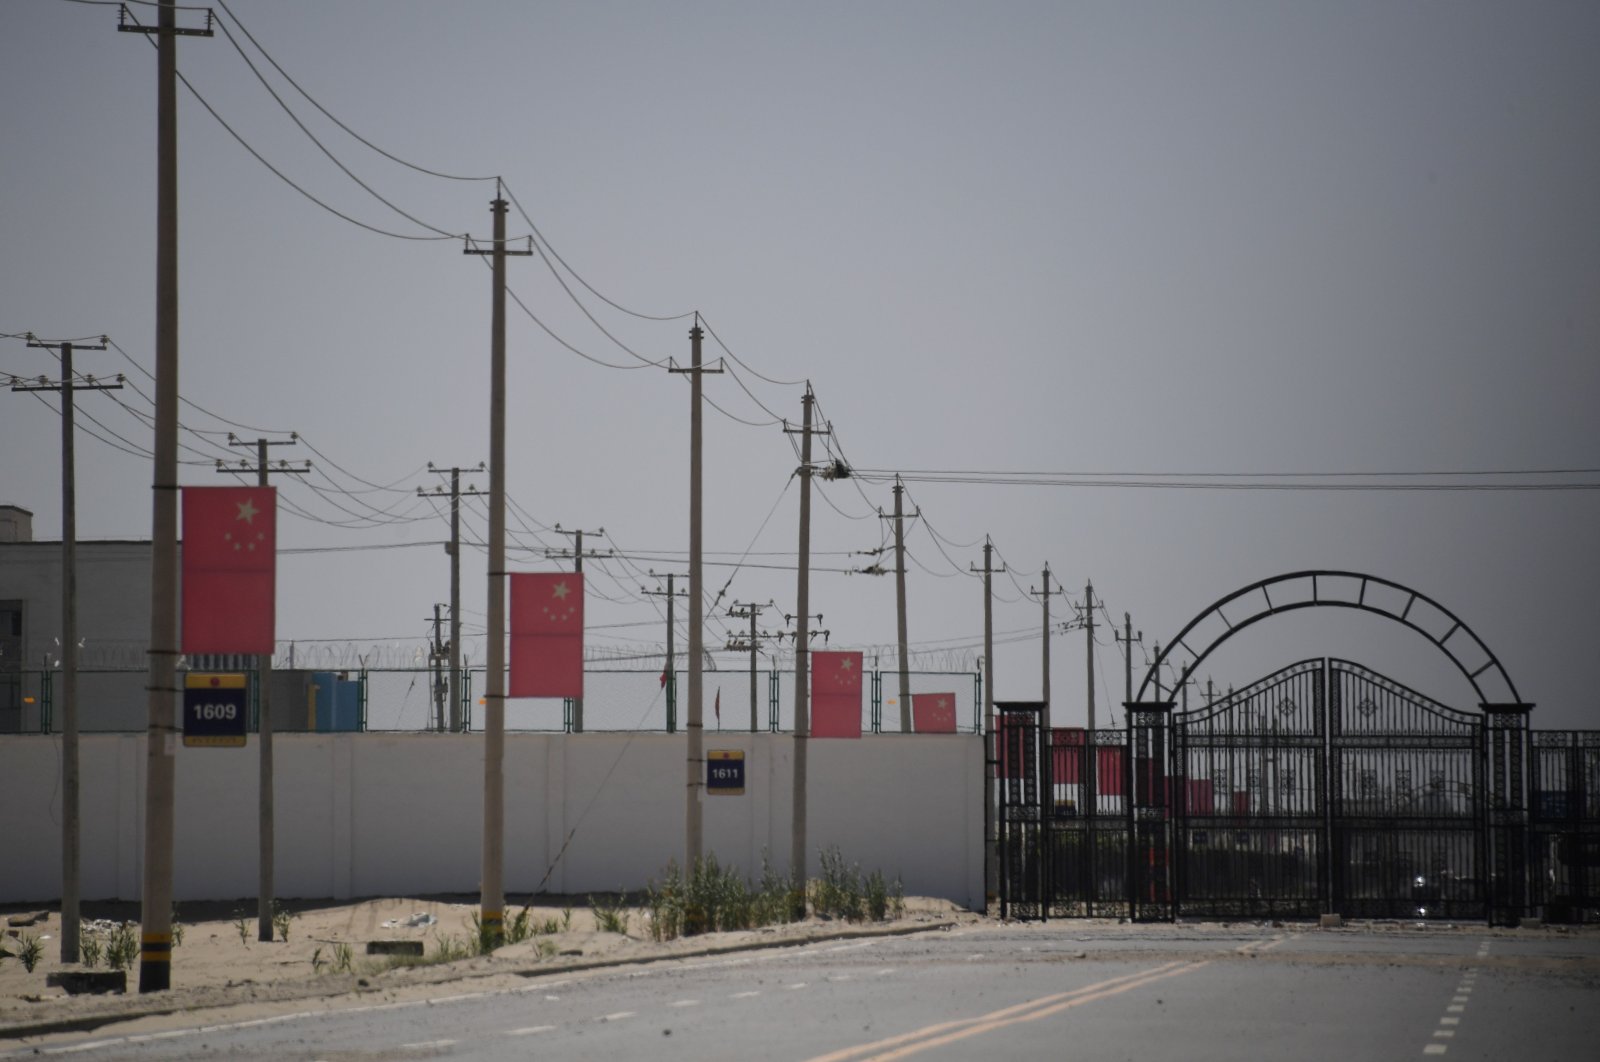 Chinese flags are seen on a road leading to a facility believed to be a reeducation camp where mostly Muslim ethnic minorities are detained, on the outskirts of Hotan in China's northwestern Xinjiang region, May 31, 2019. (AFP Photo)